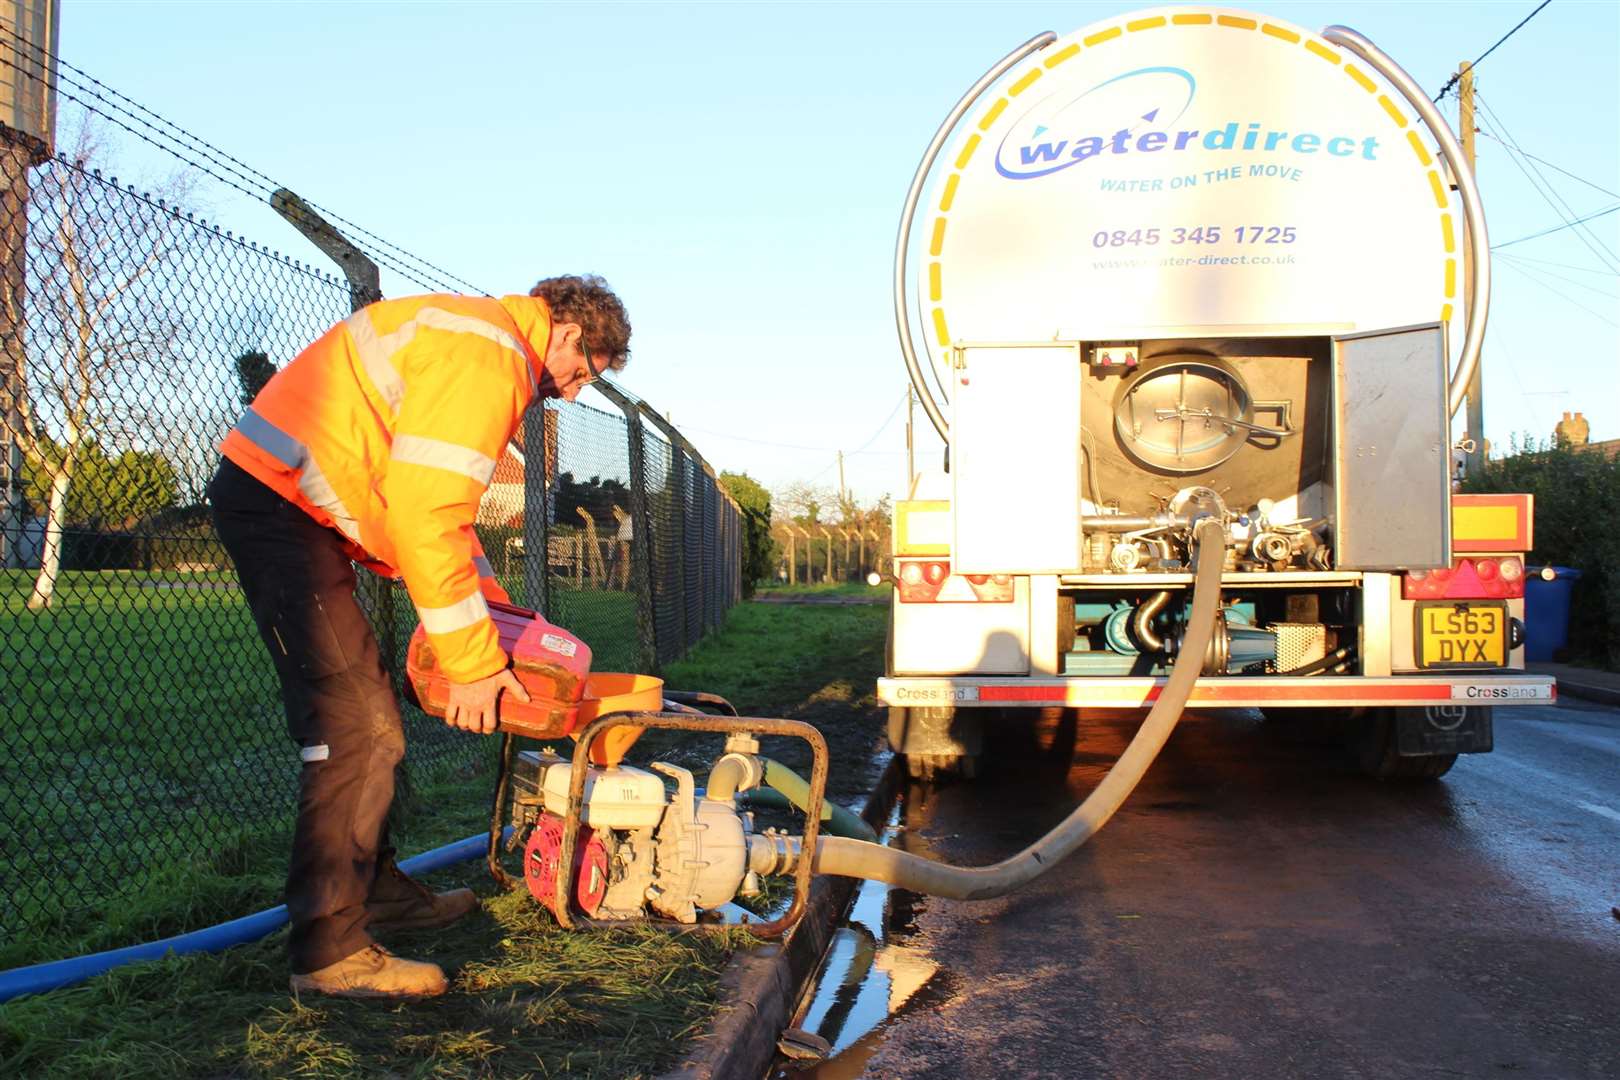 An engineer tries to refill the reservoir at Chequers by pumping water from a tanker in January 2016